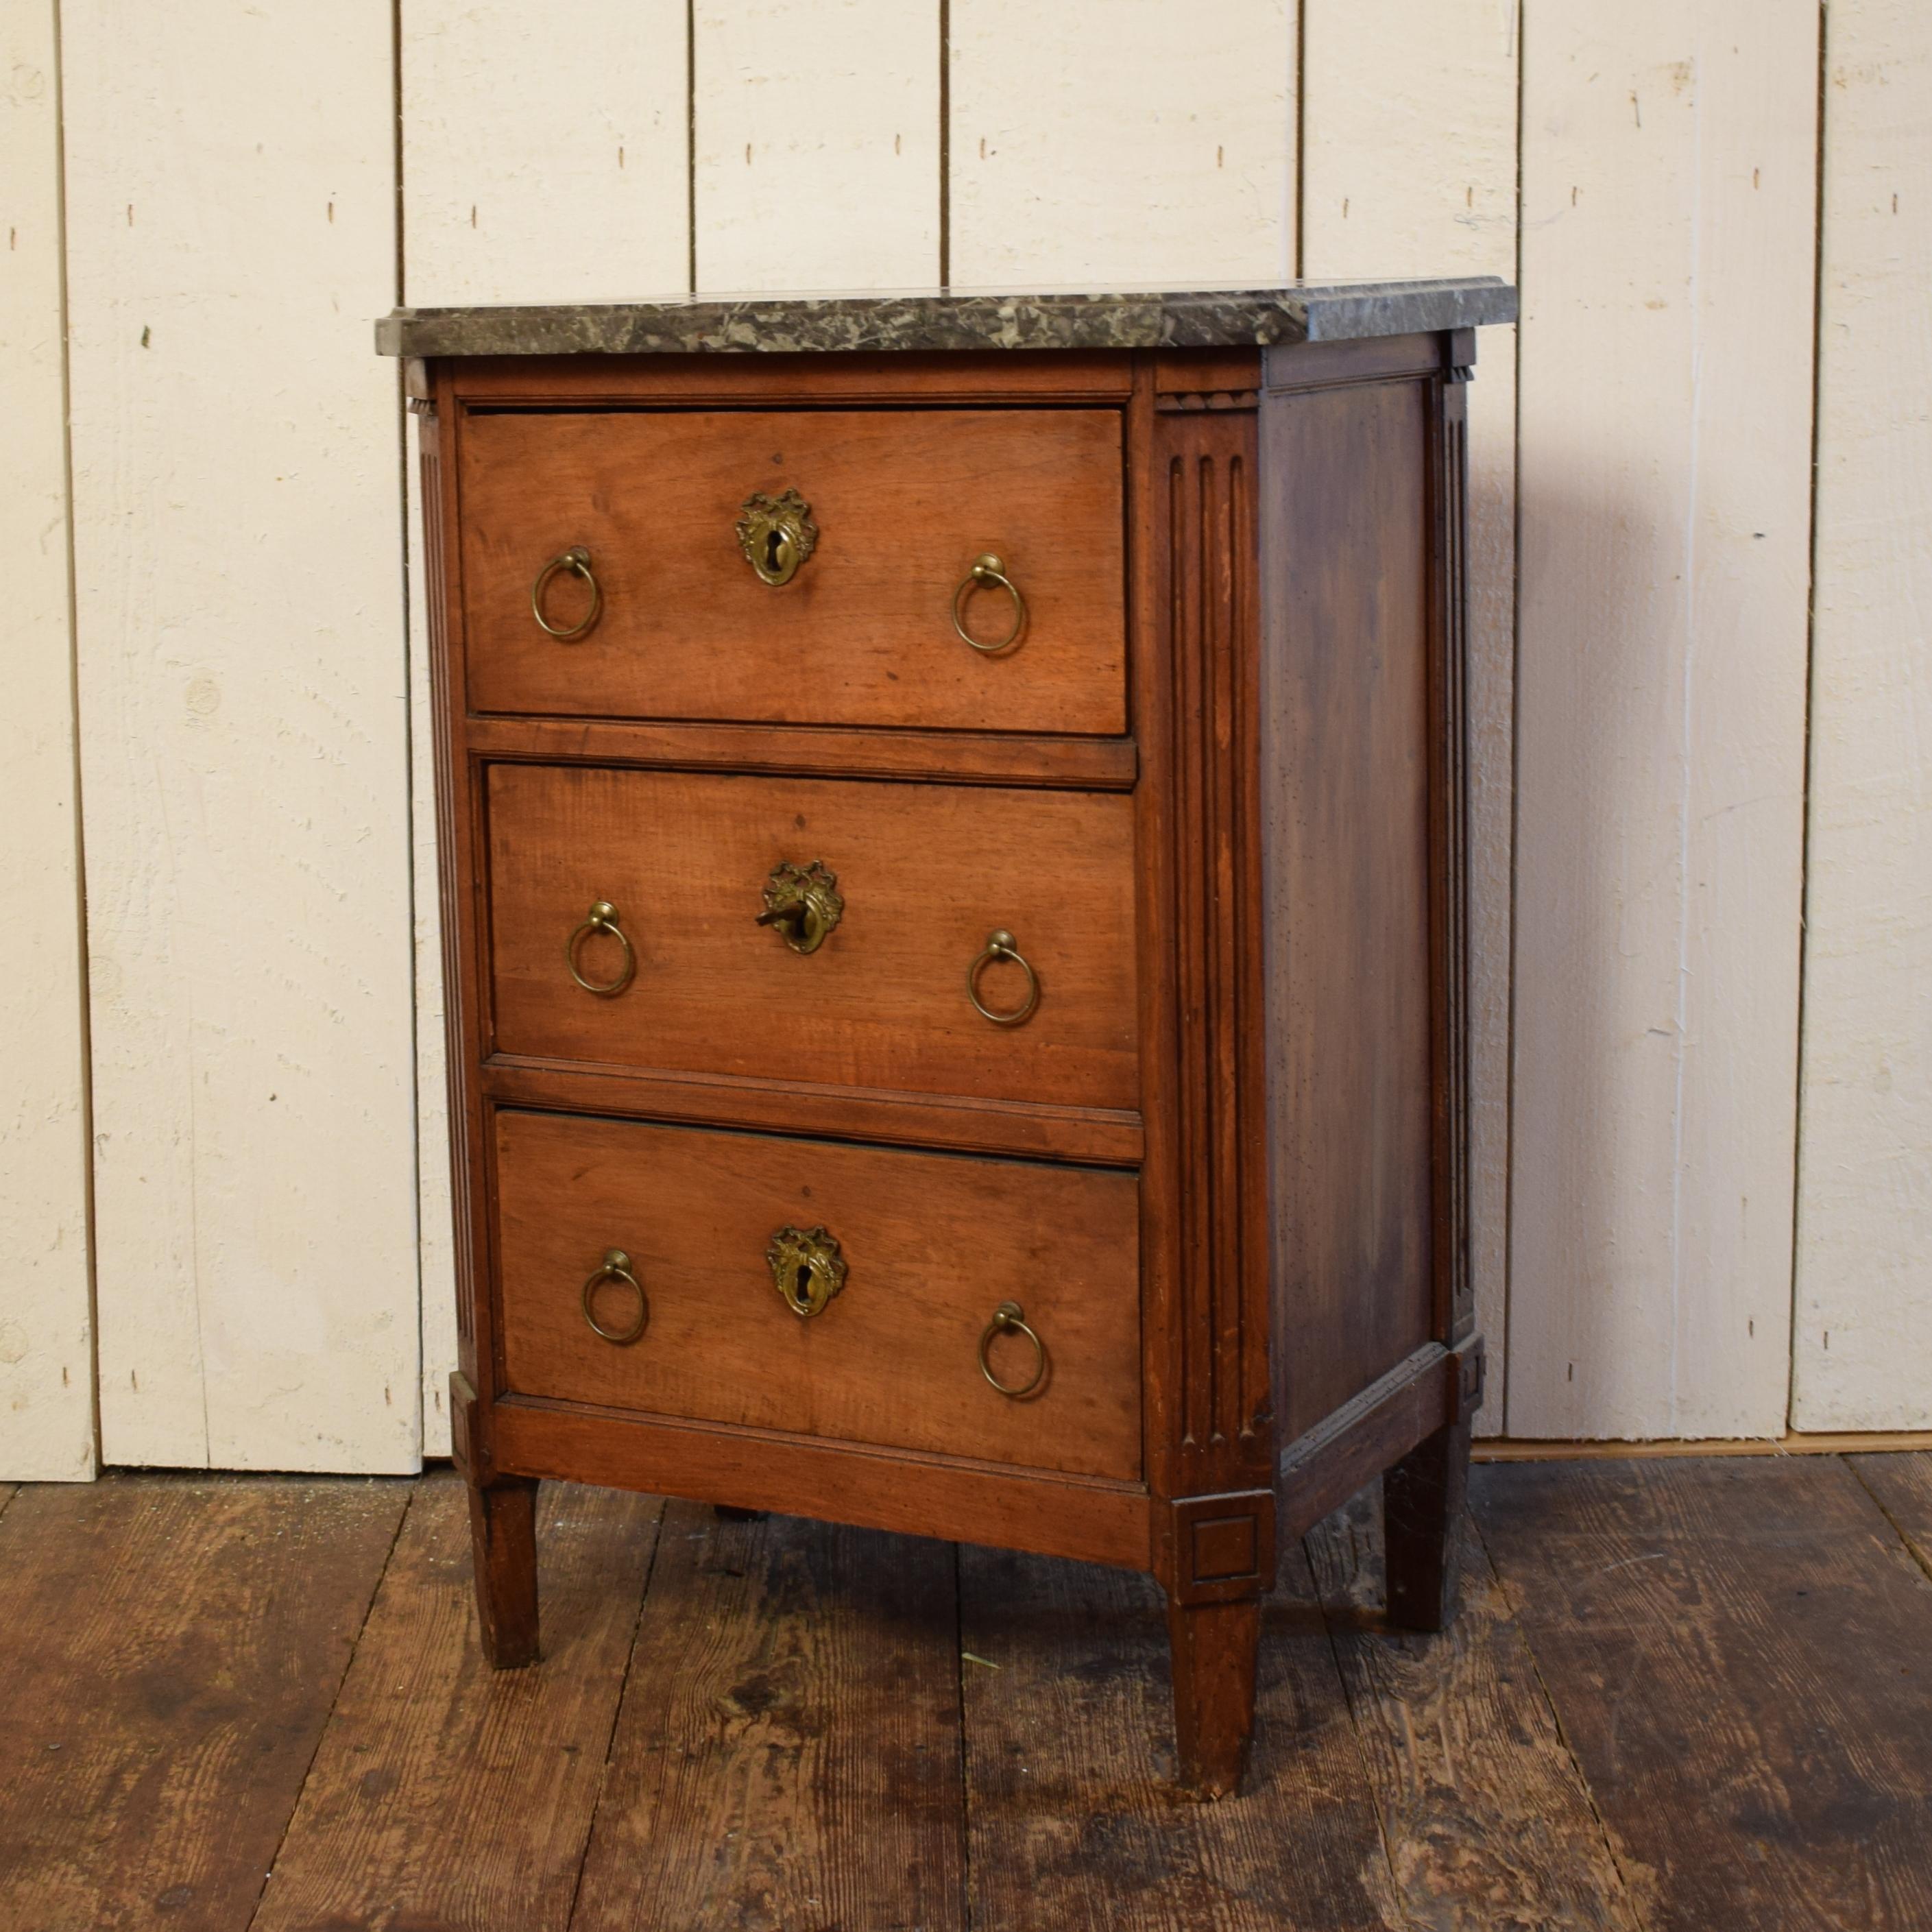 This small 19th century Empire / Neoclassicism chest of drawers hat got its original hardware and a beautiful patina. It also comes with the original marble top.
It was build in France, circa 1810.
A lovely piece of furniture with a nice and warm